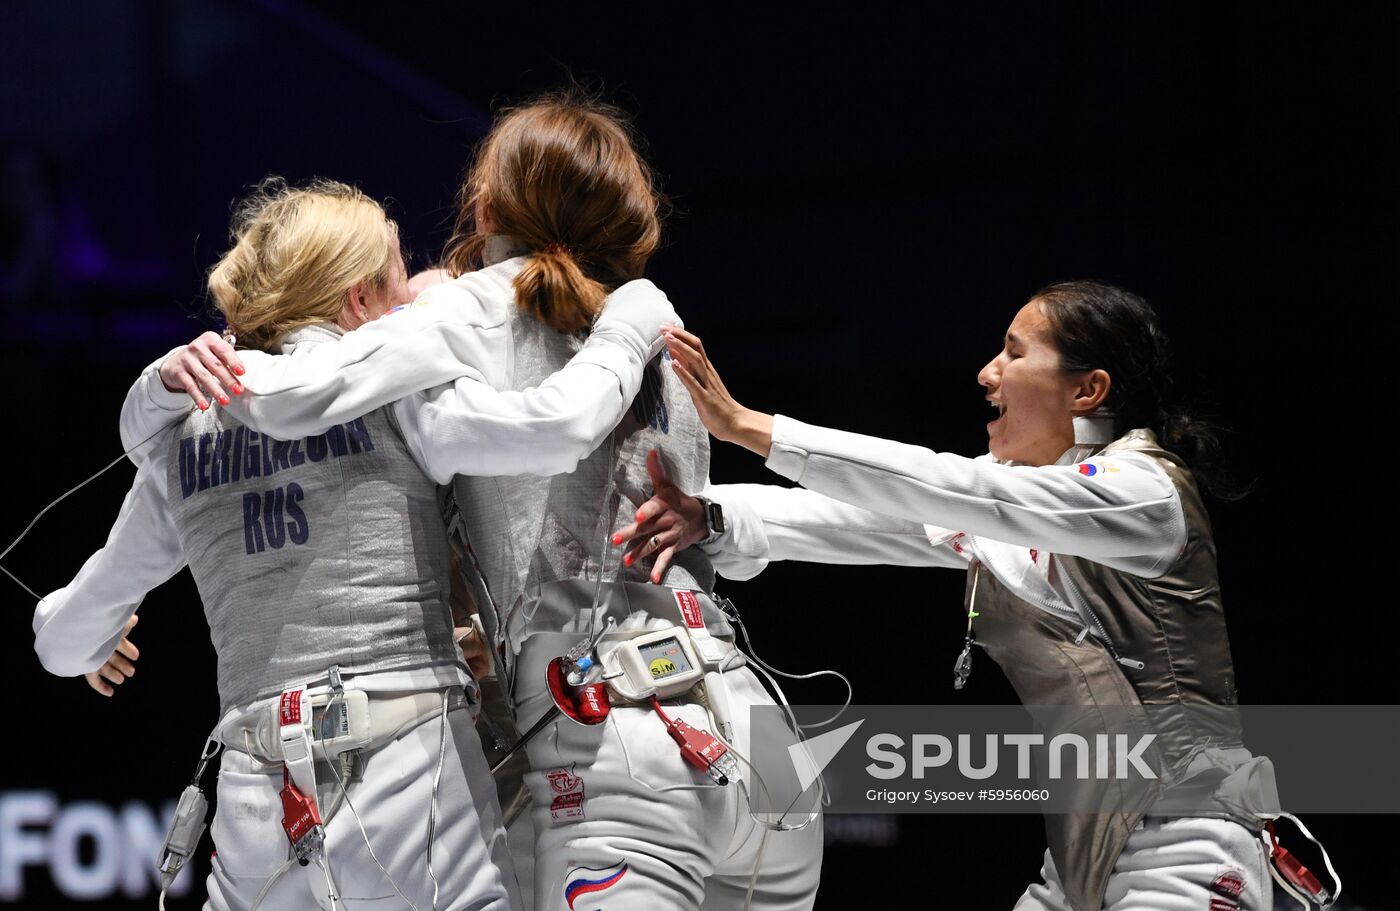 Hungary Fencing Worlds